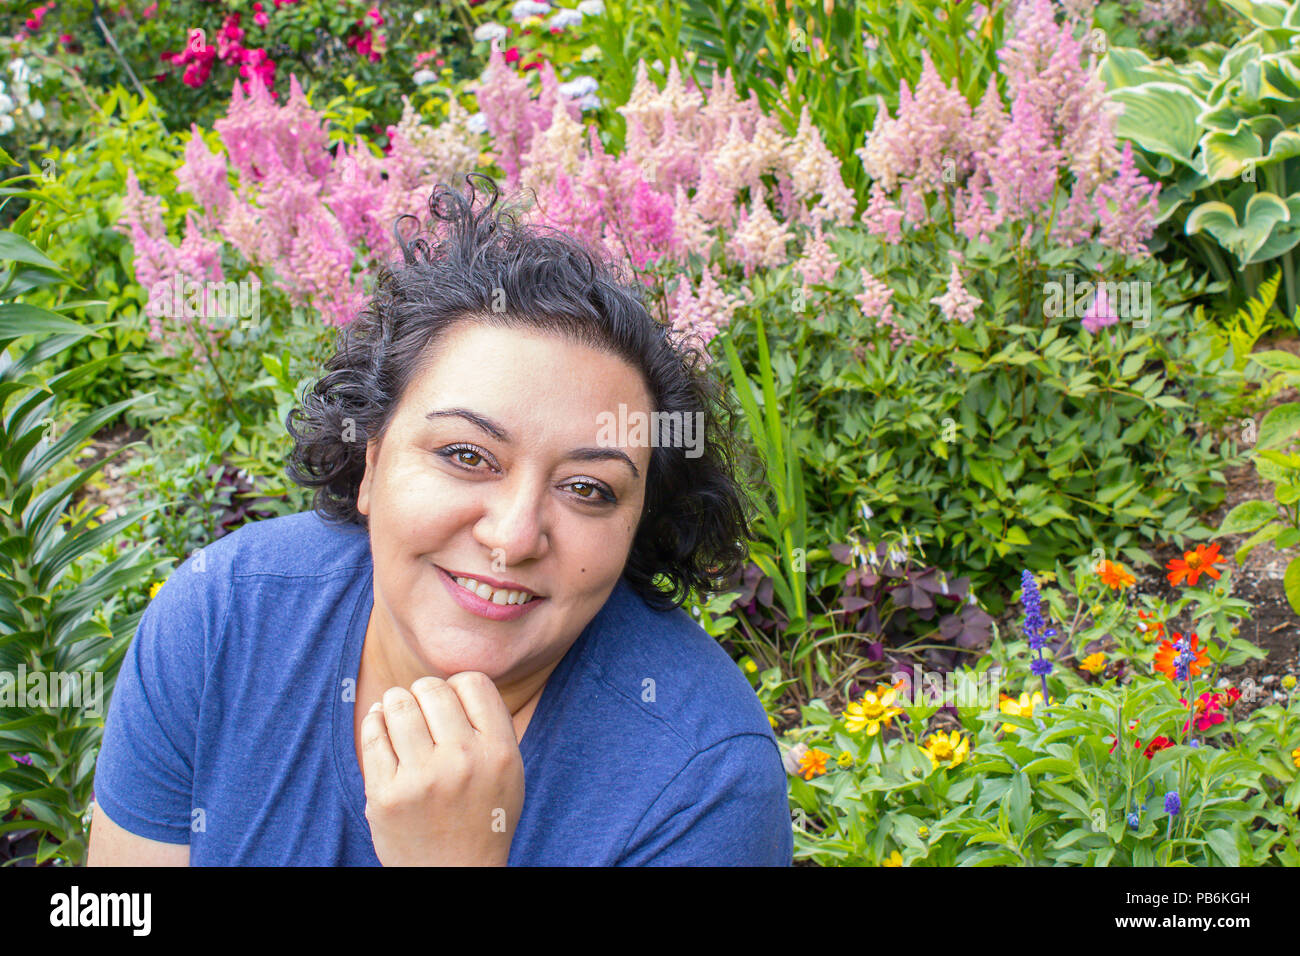 head and shoulders shot of a woman standing in front of pink flowers in a garden Stock Photo